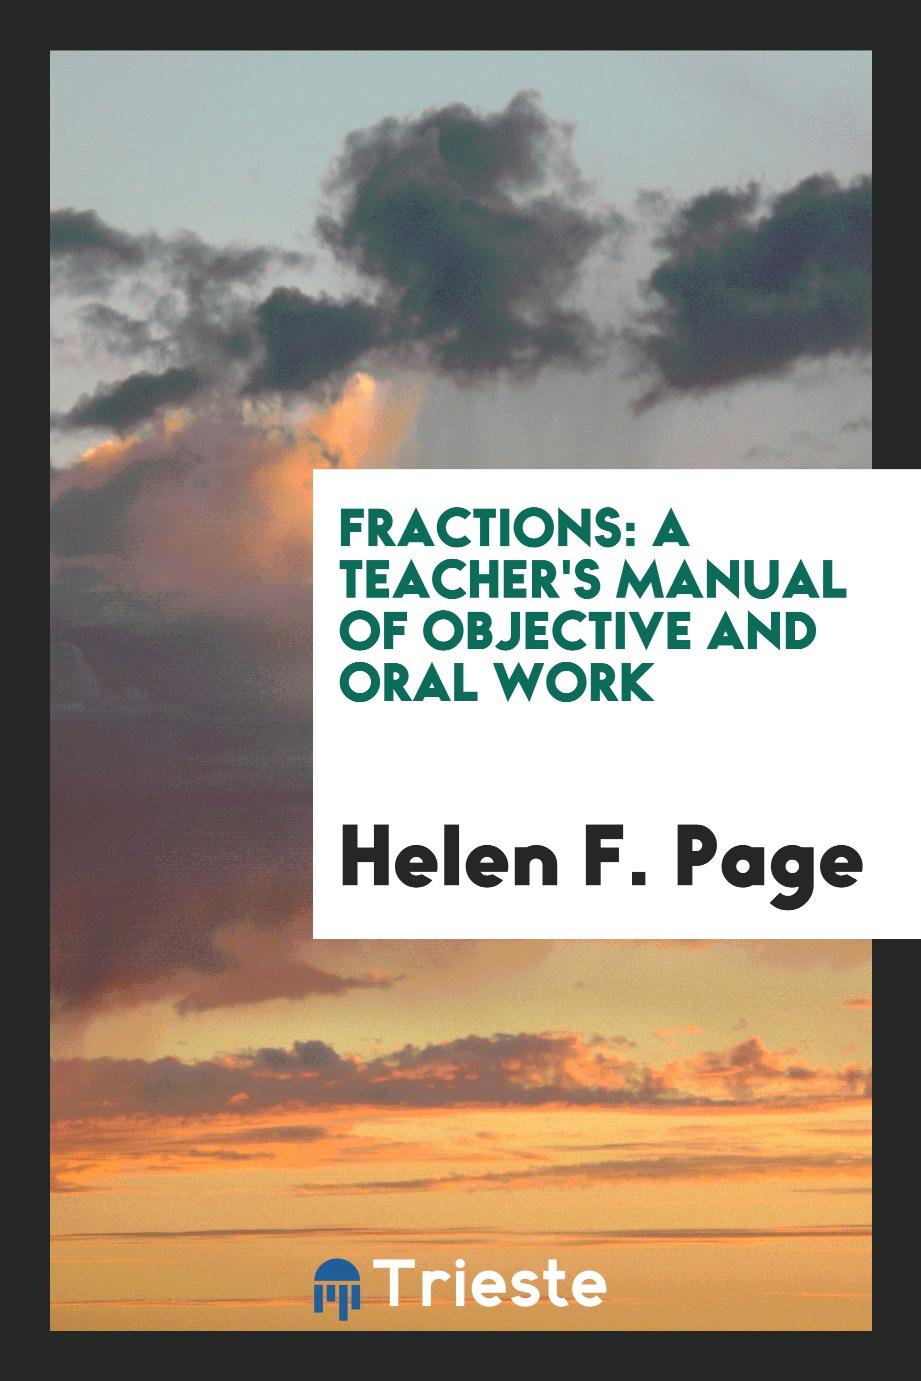 Fractions: A Teacher's Manual of Objective and Oral Work